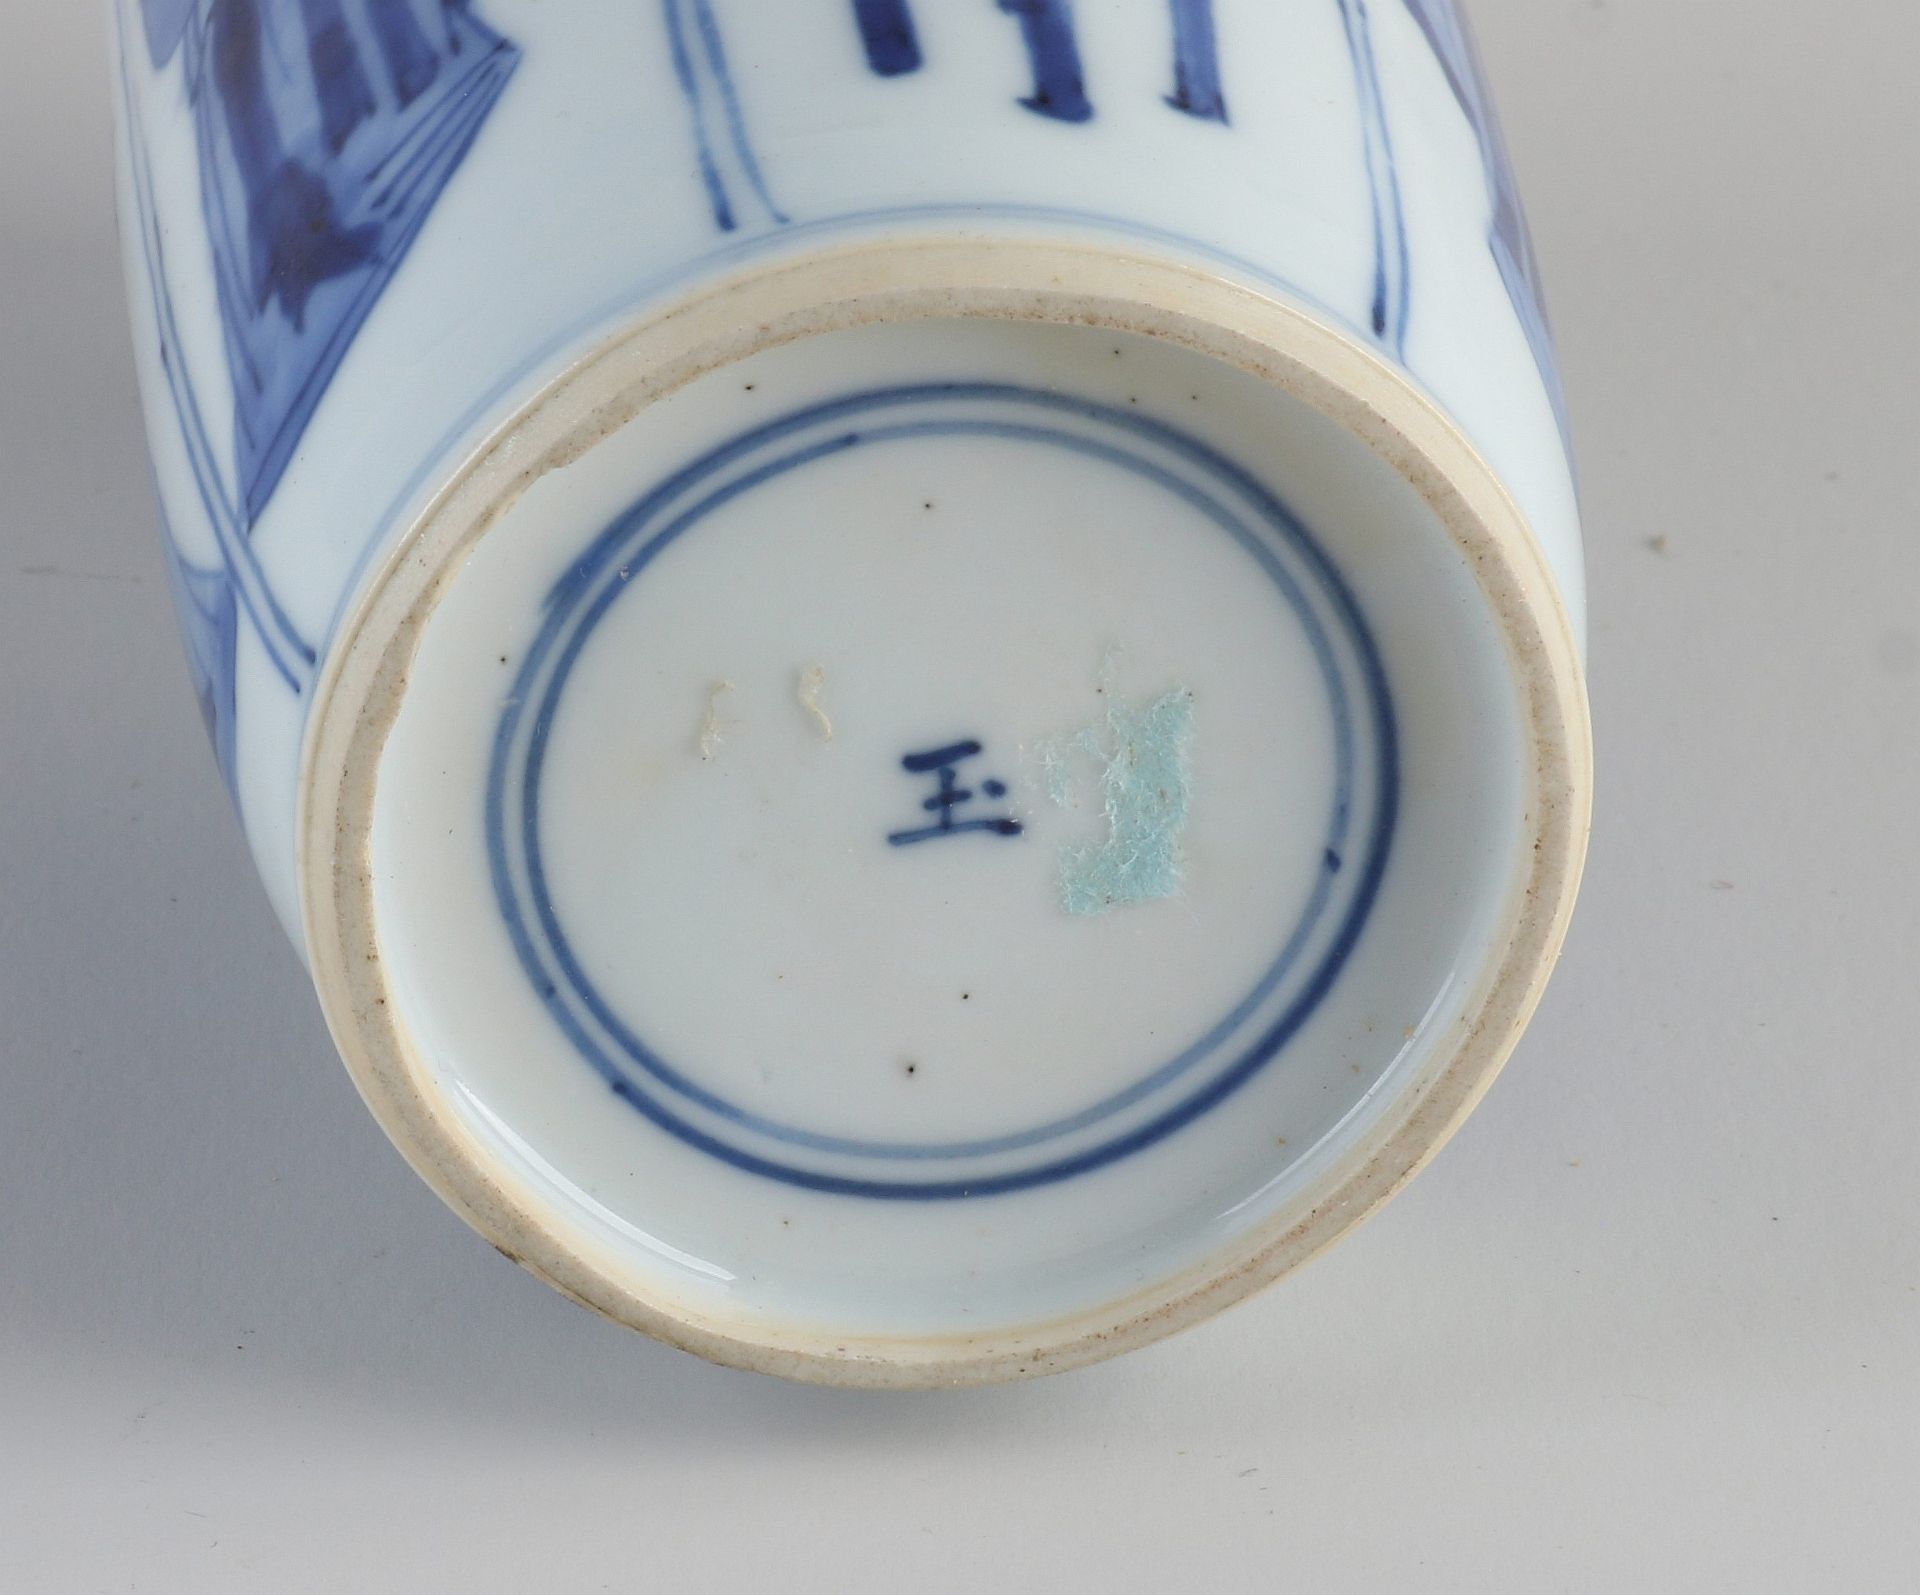 17th - 18th century Kang Xi vase with lid, H 19 cm. - Image 3 of 3